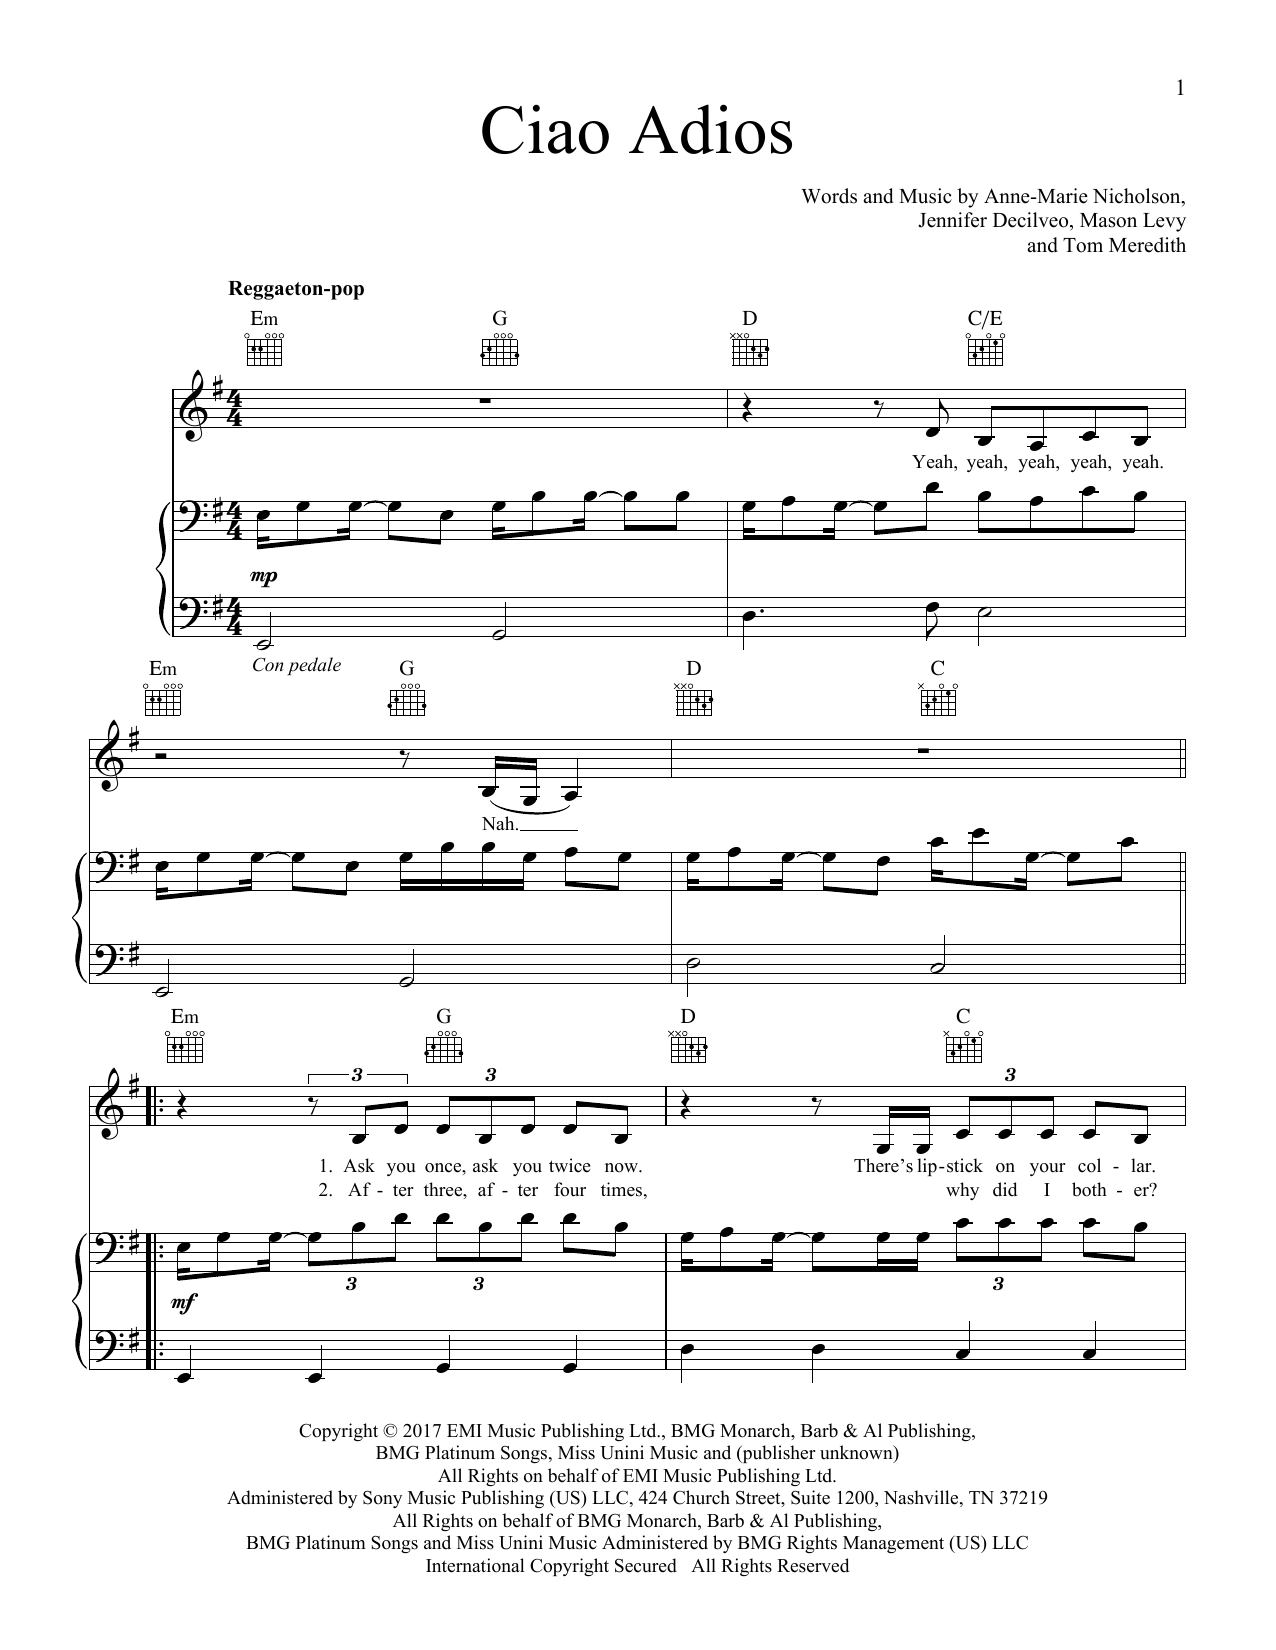 Download Anne-Marie Ciao Adios Sheet Music